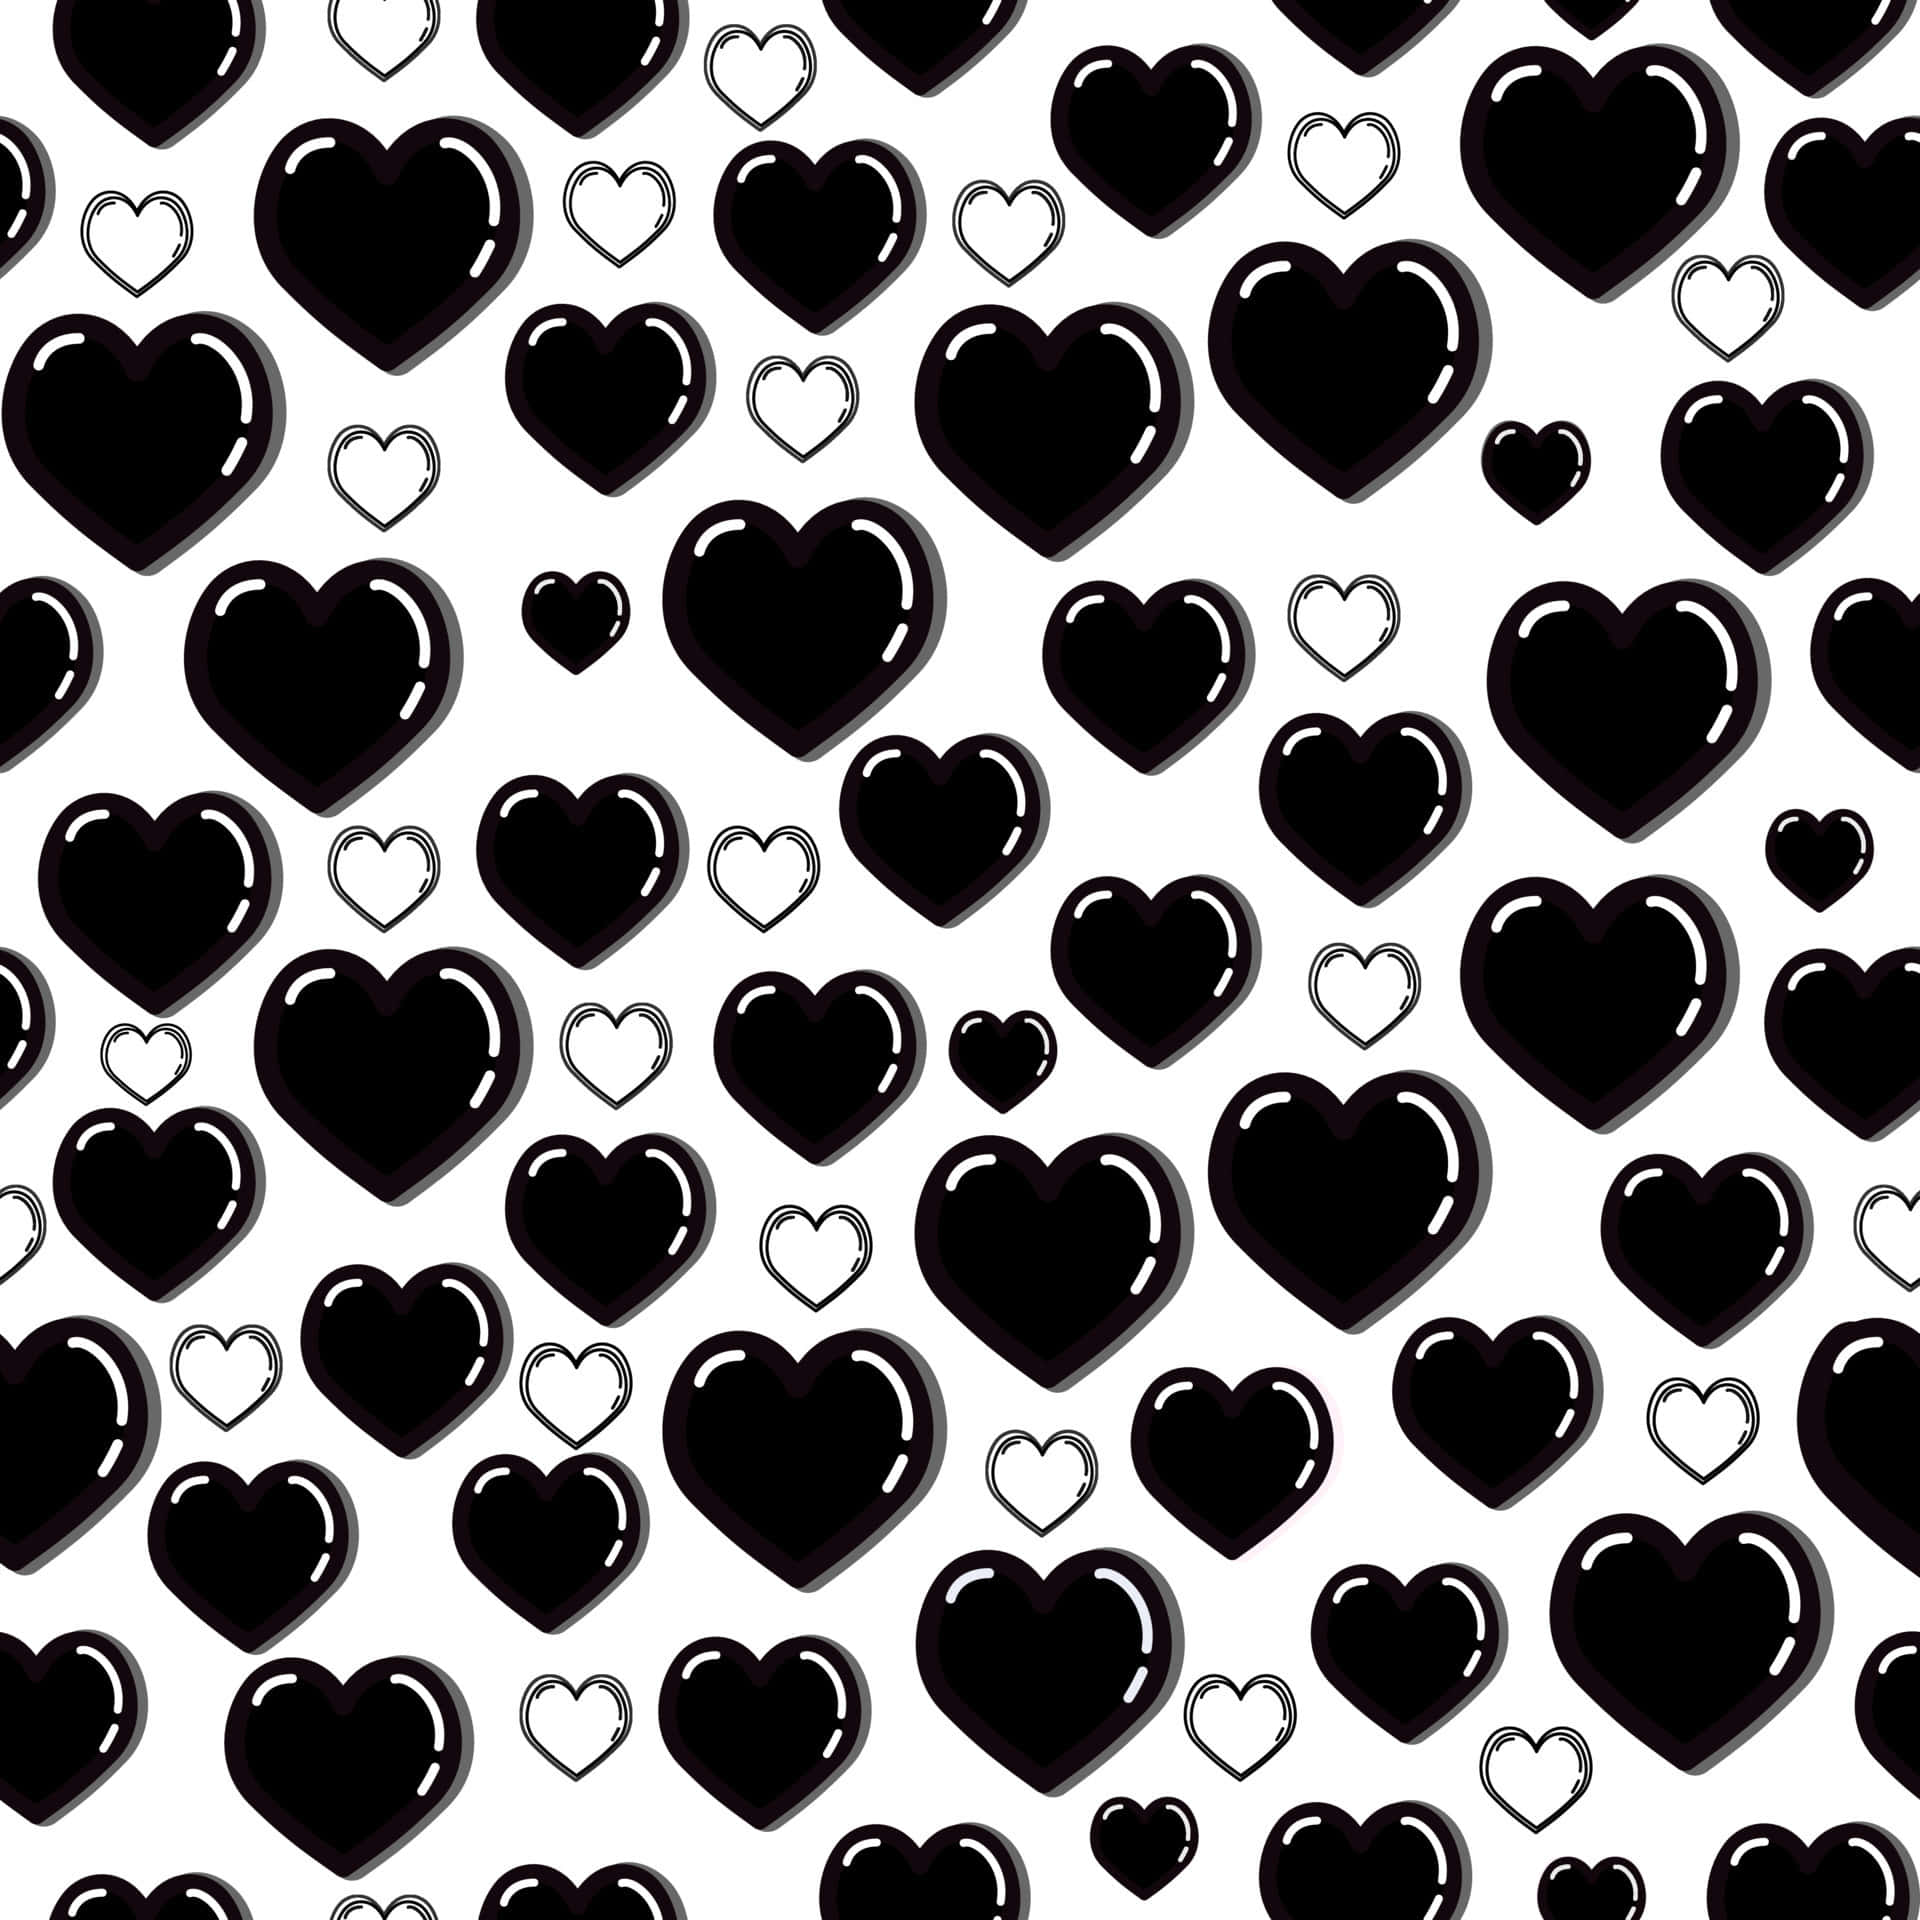 Loving Contrast: Black and White Heart Background